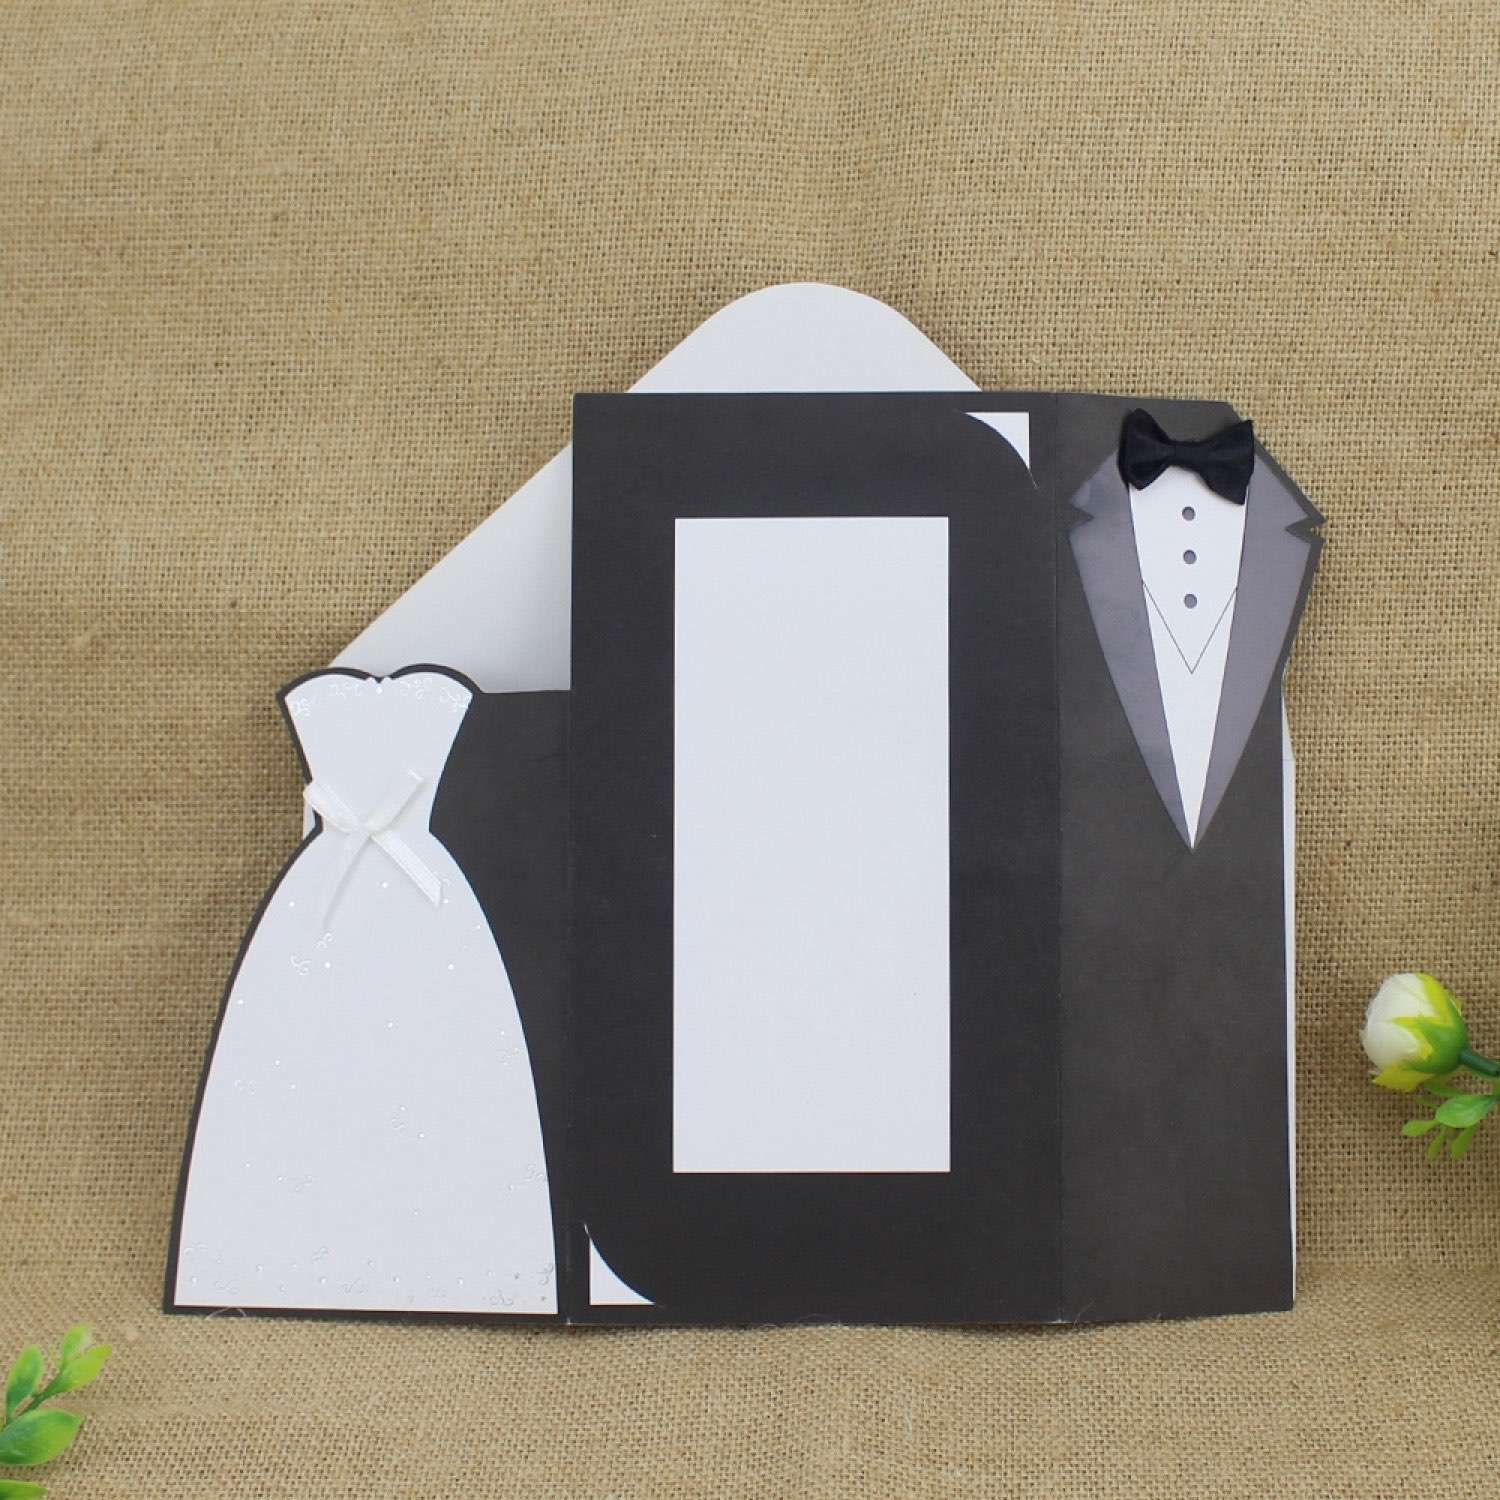 Wedding Dress and Business Suit Invitation Card Wedding Invitation Card Customized Gate Fold